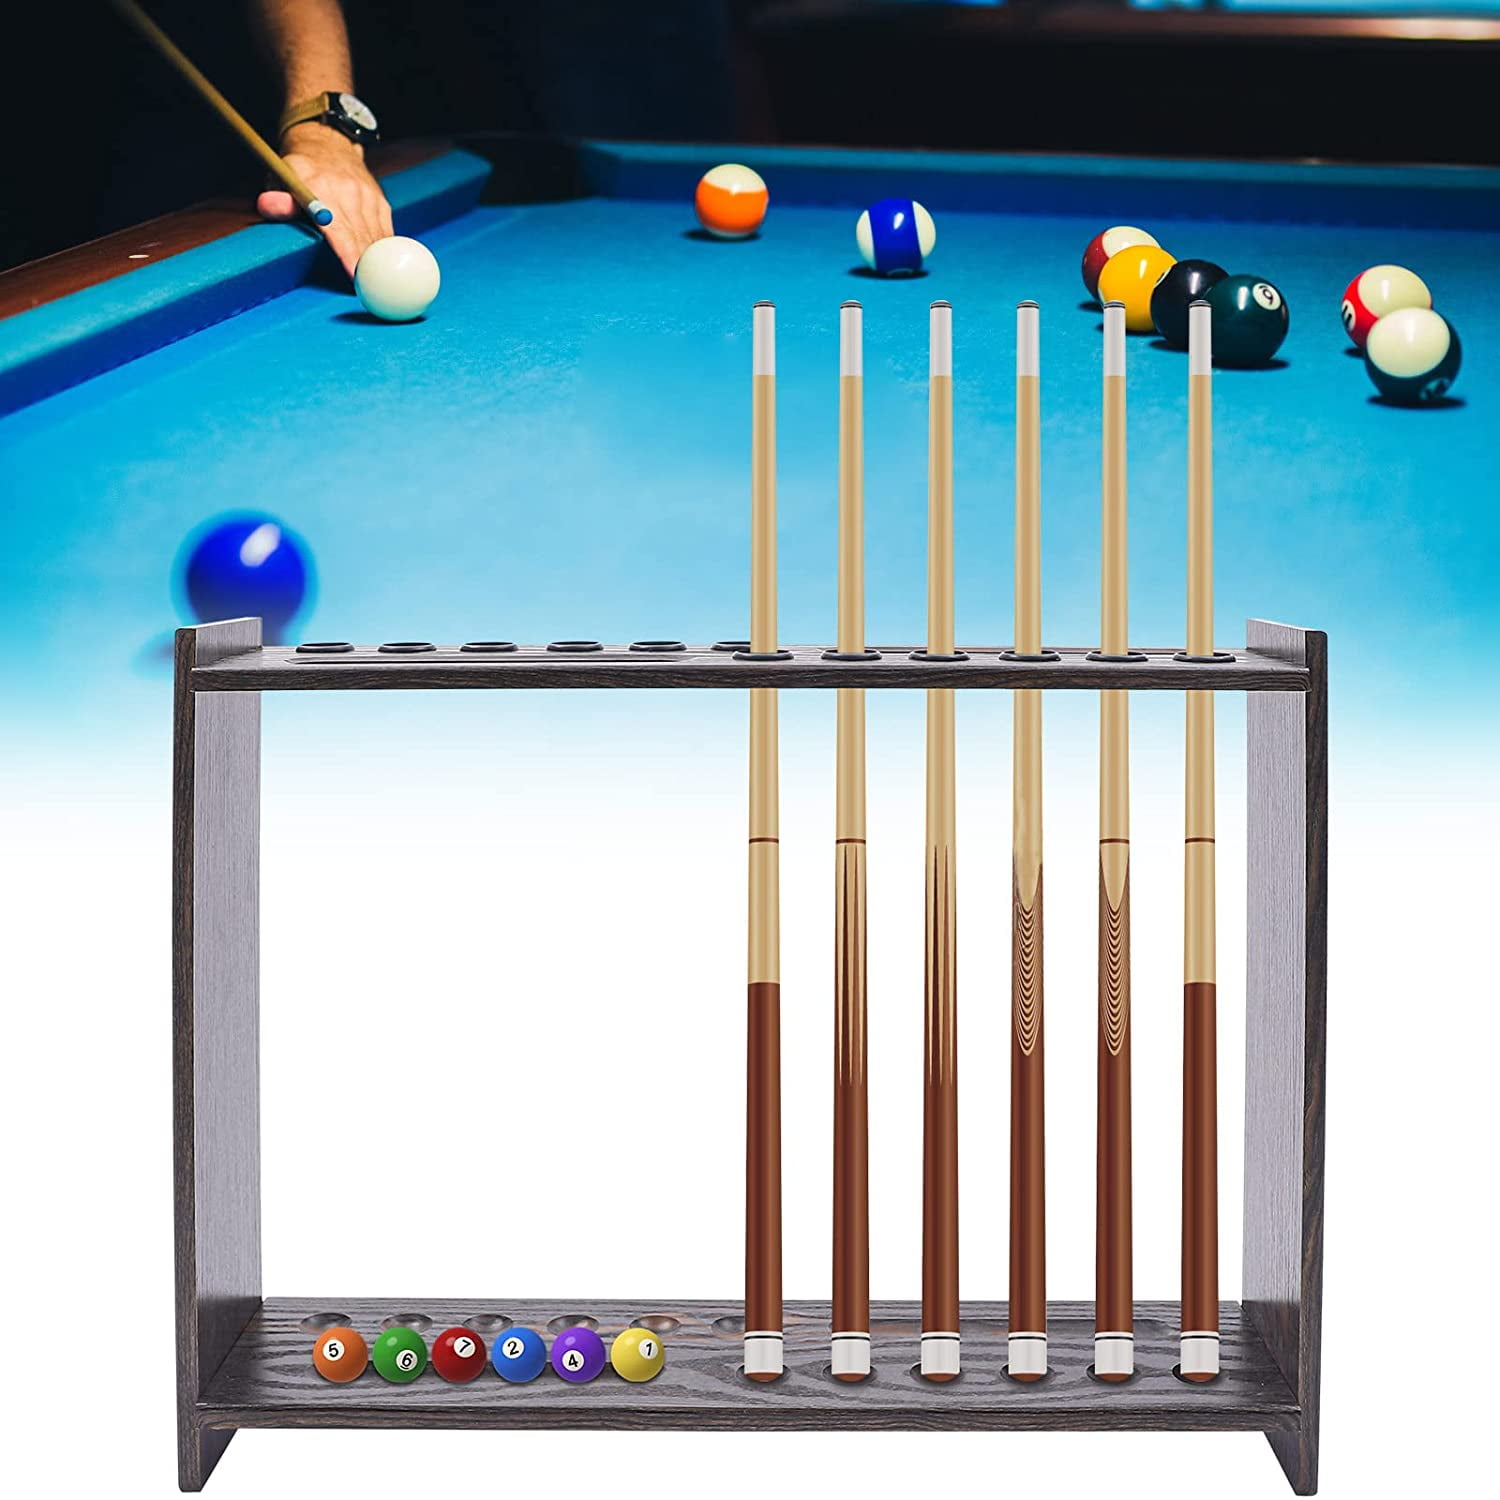 Billiards Snooker Pool Cues Holder Cue Stick Stand Rest Variety of Sizes 